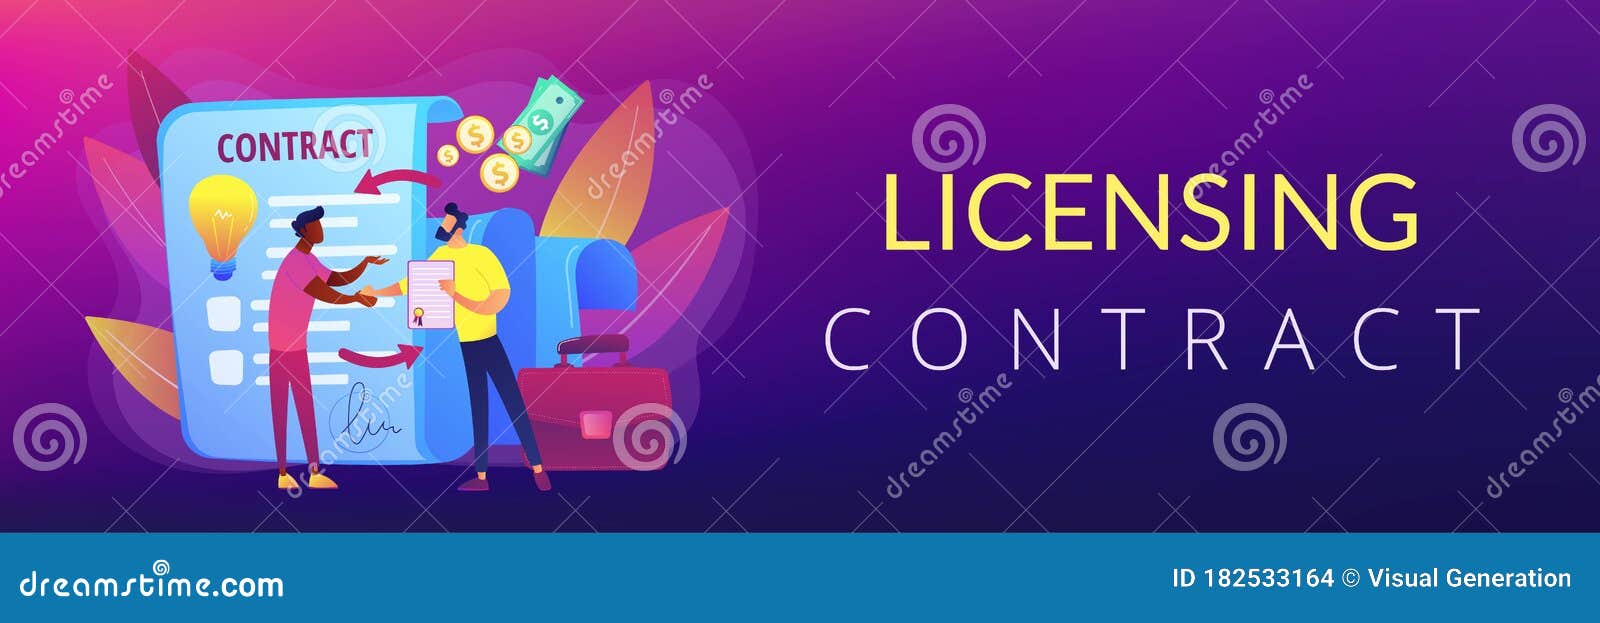 Licensing Contract  Concept Banner  Header  Stock Vector Illustration of 